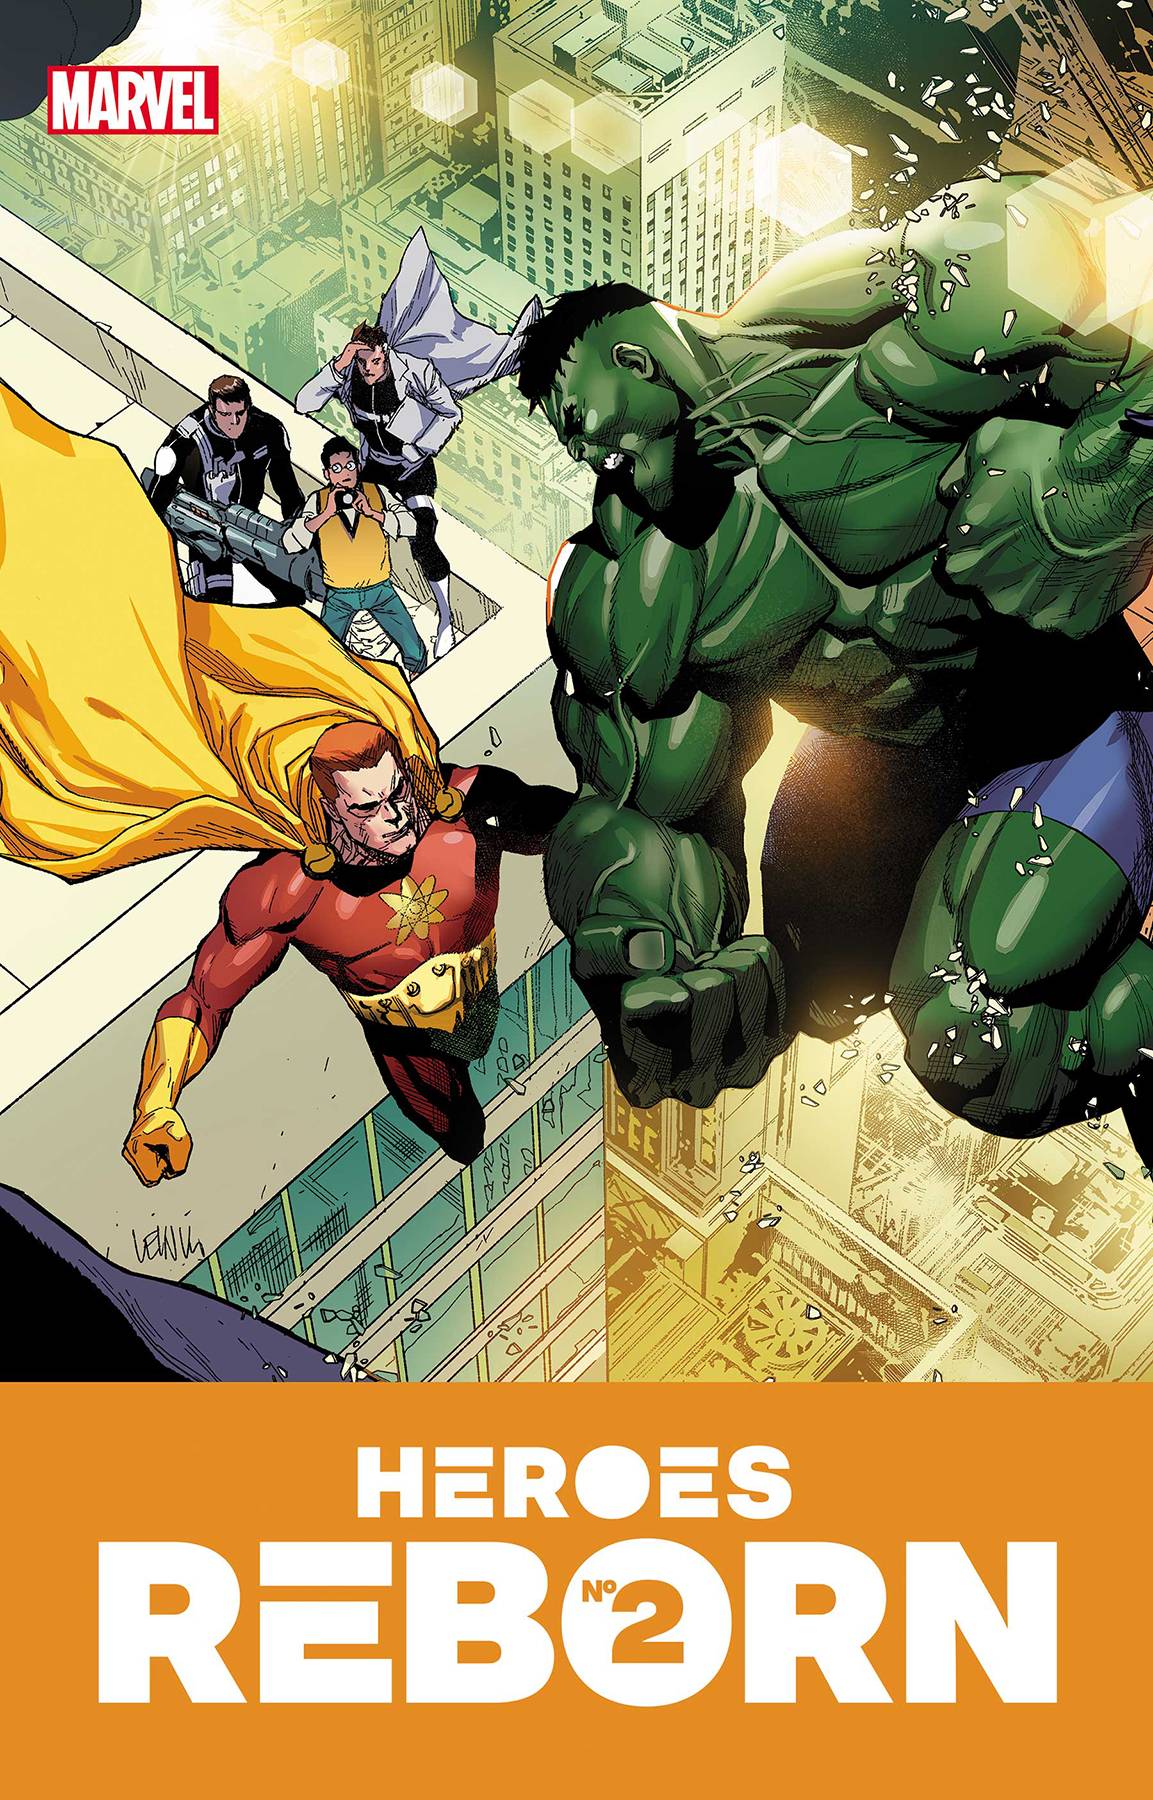 HEROES REBORN #2 (OF 7) | Game Master's Emporium (The New GME)